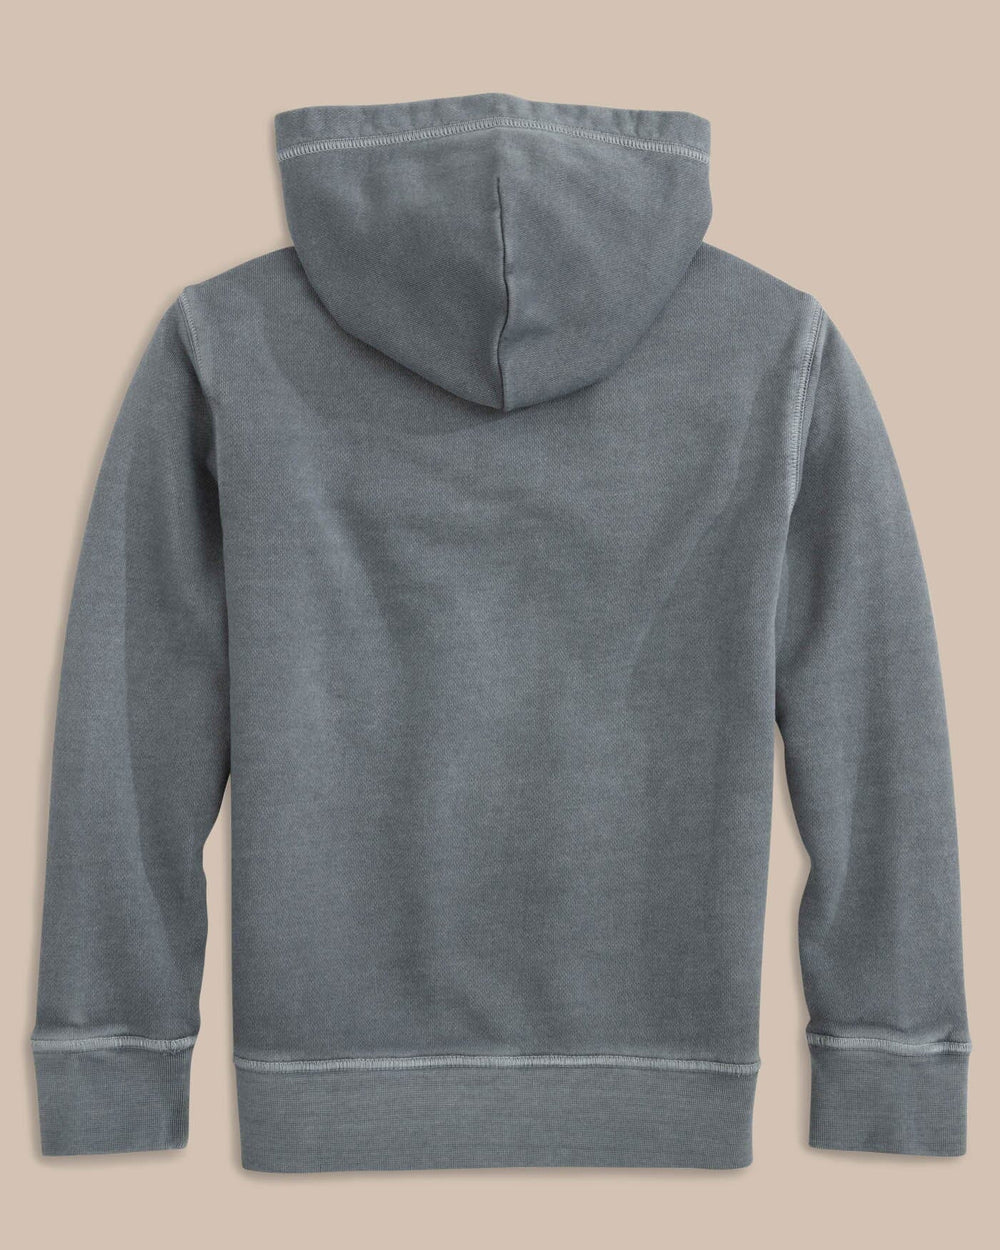 The back view of the Southern Tide Kids Sun Farer Upper Deck Long Sleeve Hoodie by Southern Tide - Harbour Mist